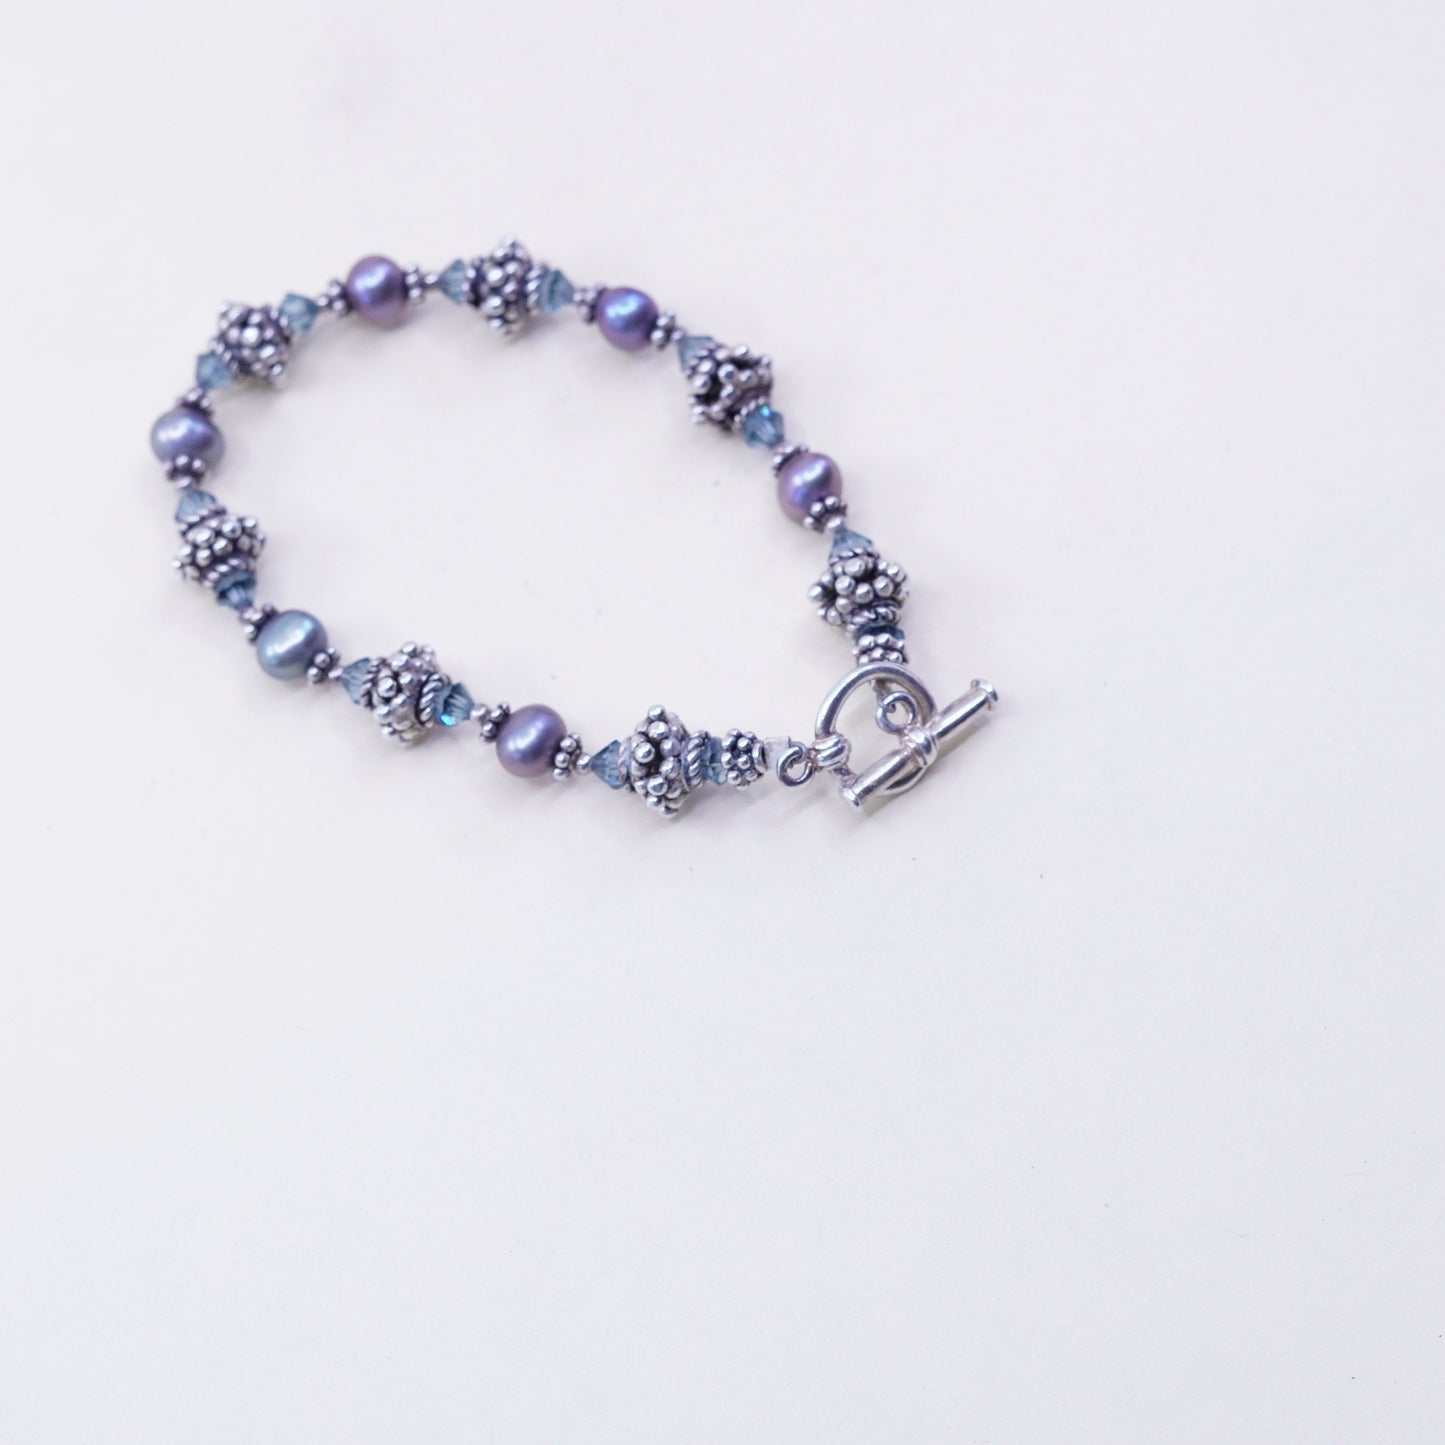 6”, Sterling 925 silver bracelet, pearl beads with crystal and heart closure